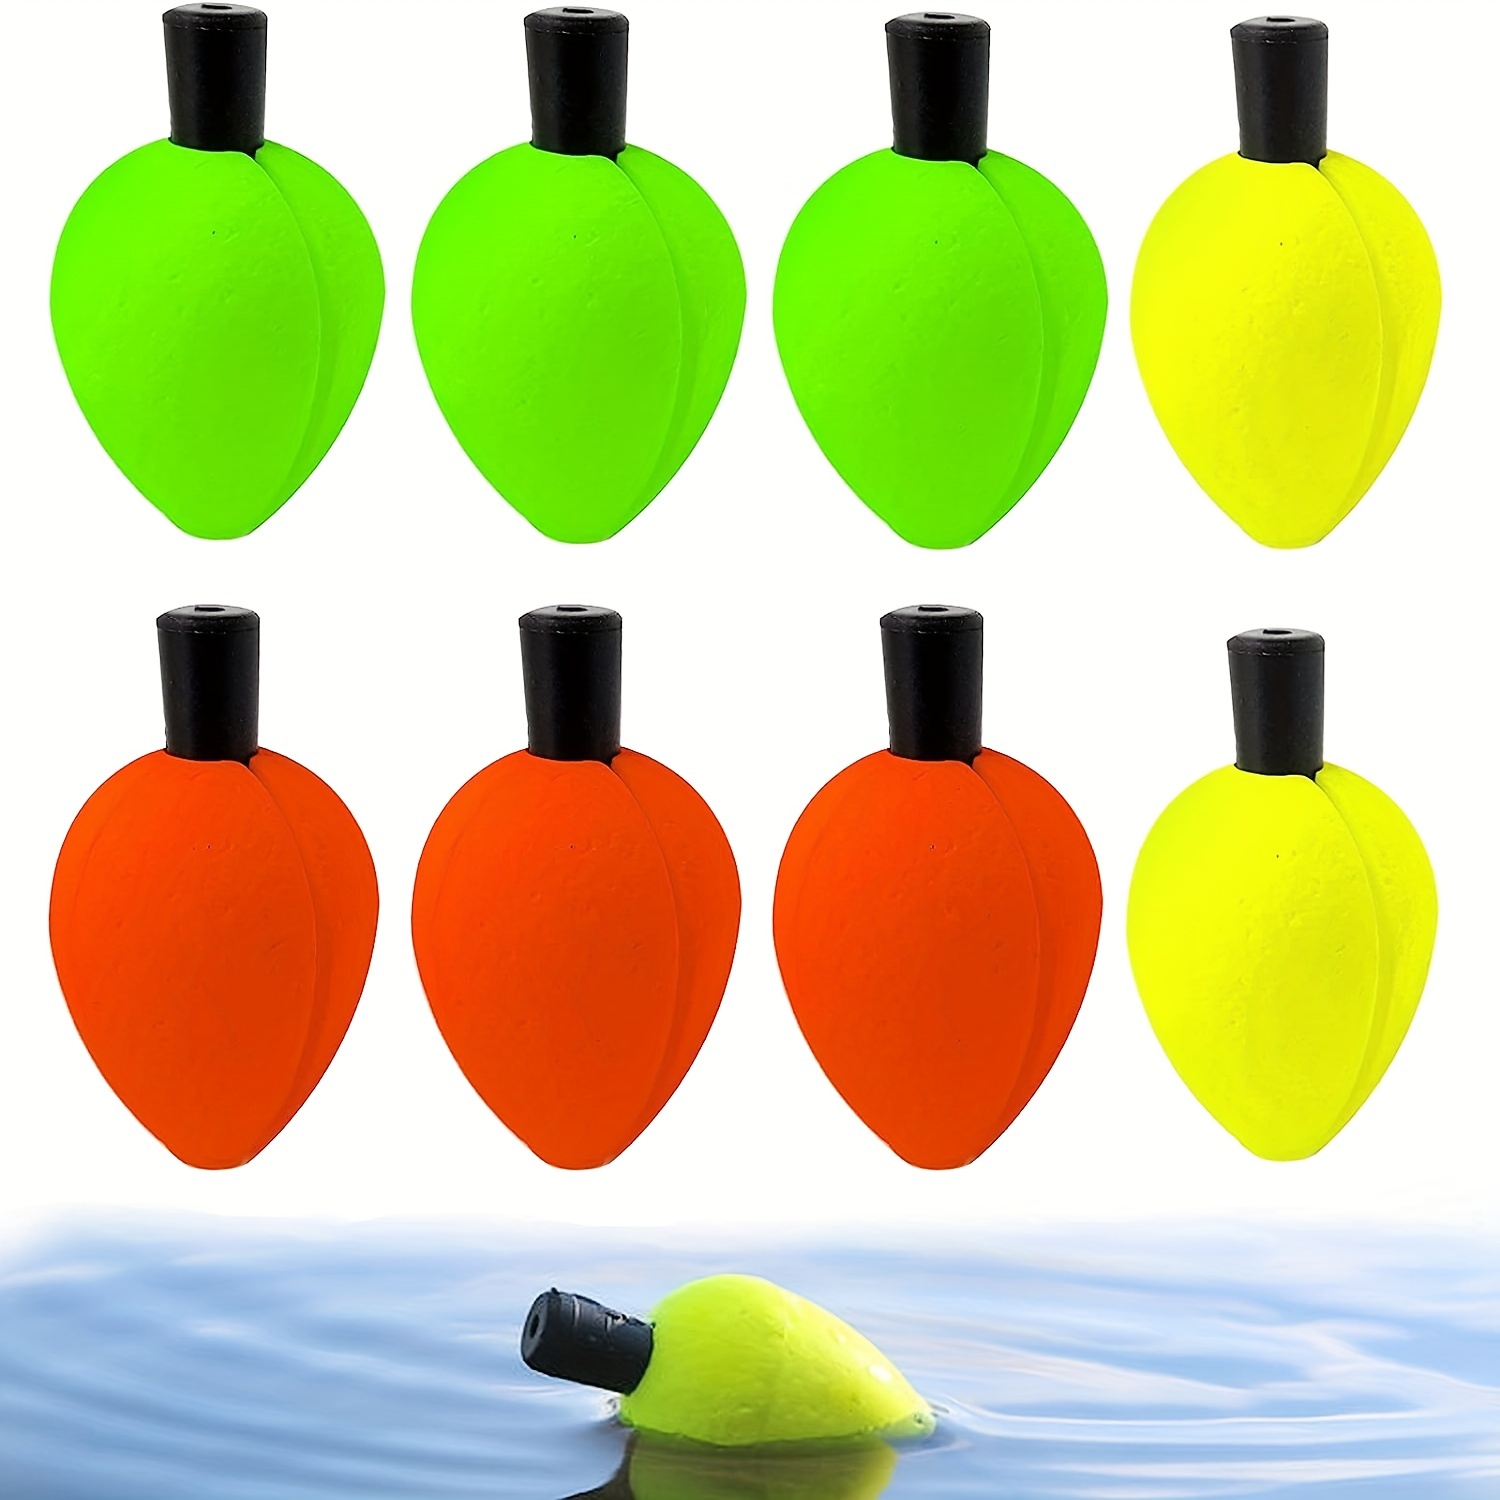 Bass Pro Shops Weighted Foam Oval Floats - Orange - 2 Pack